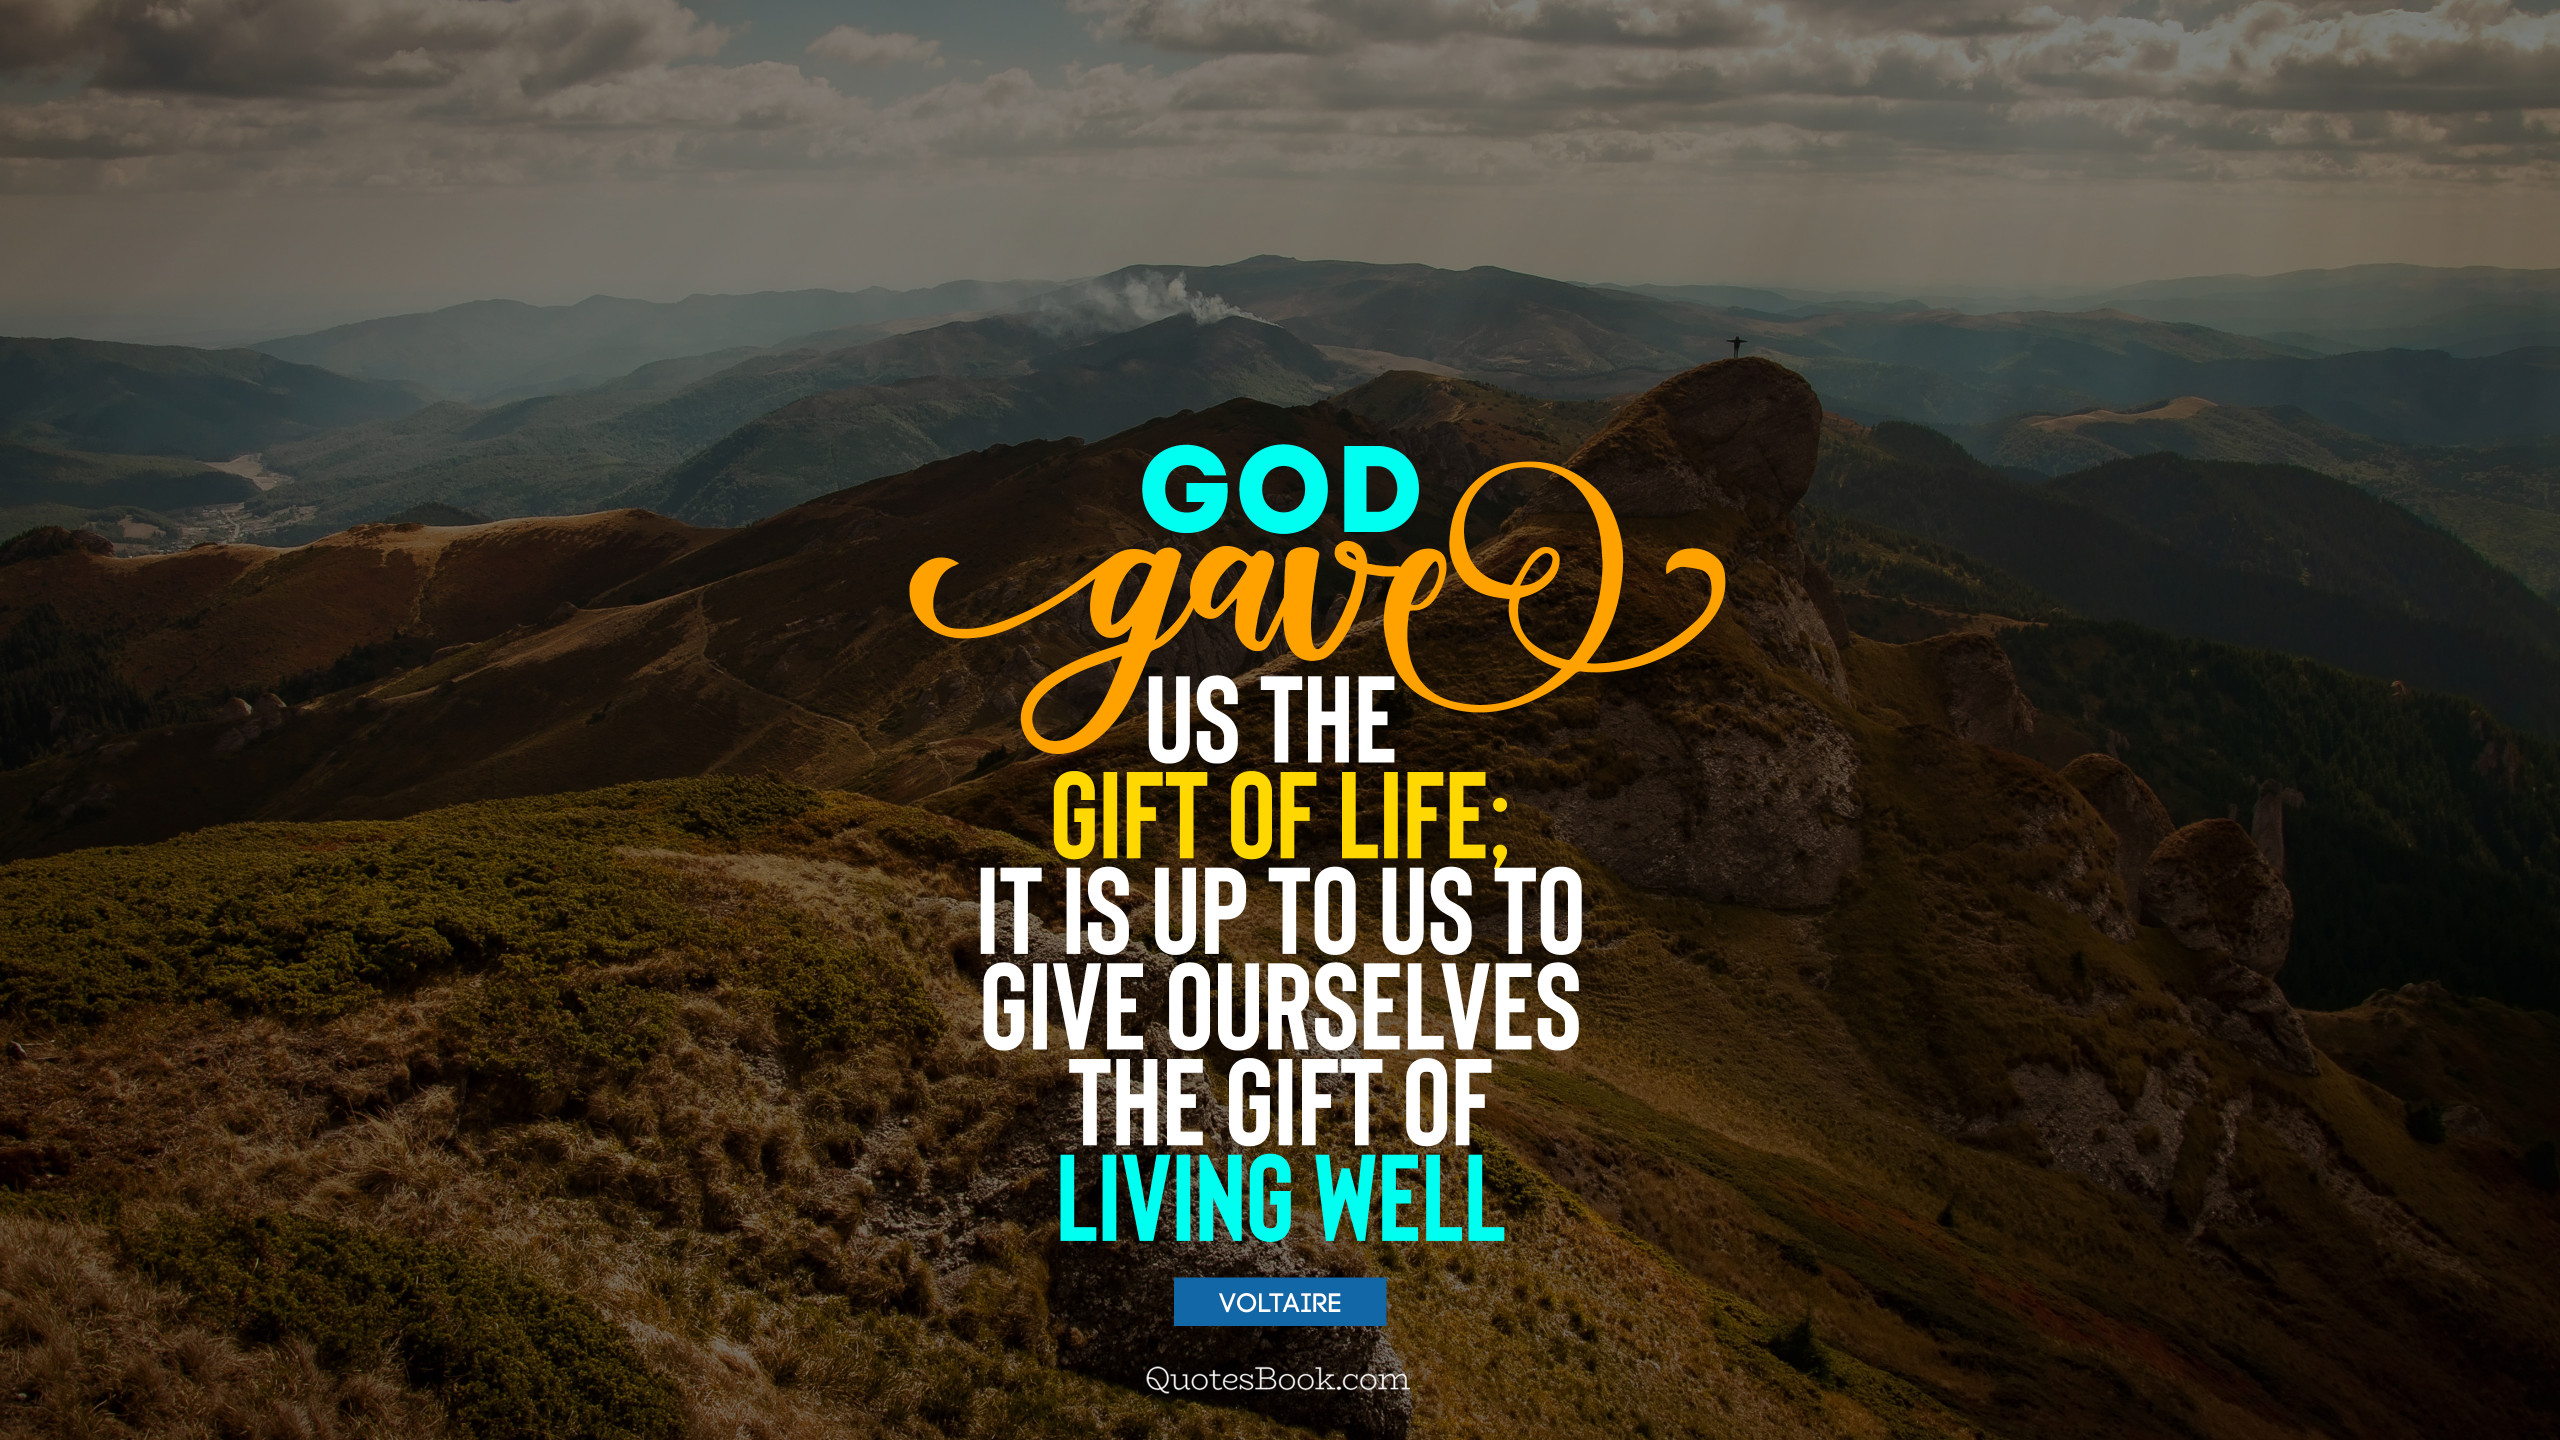 God gave us the gift of life; it is up to us to give ourselves the gift